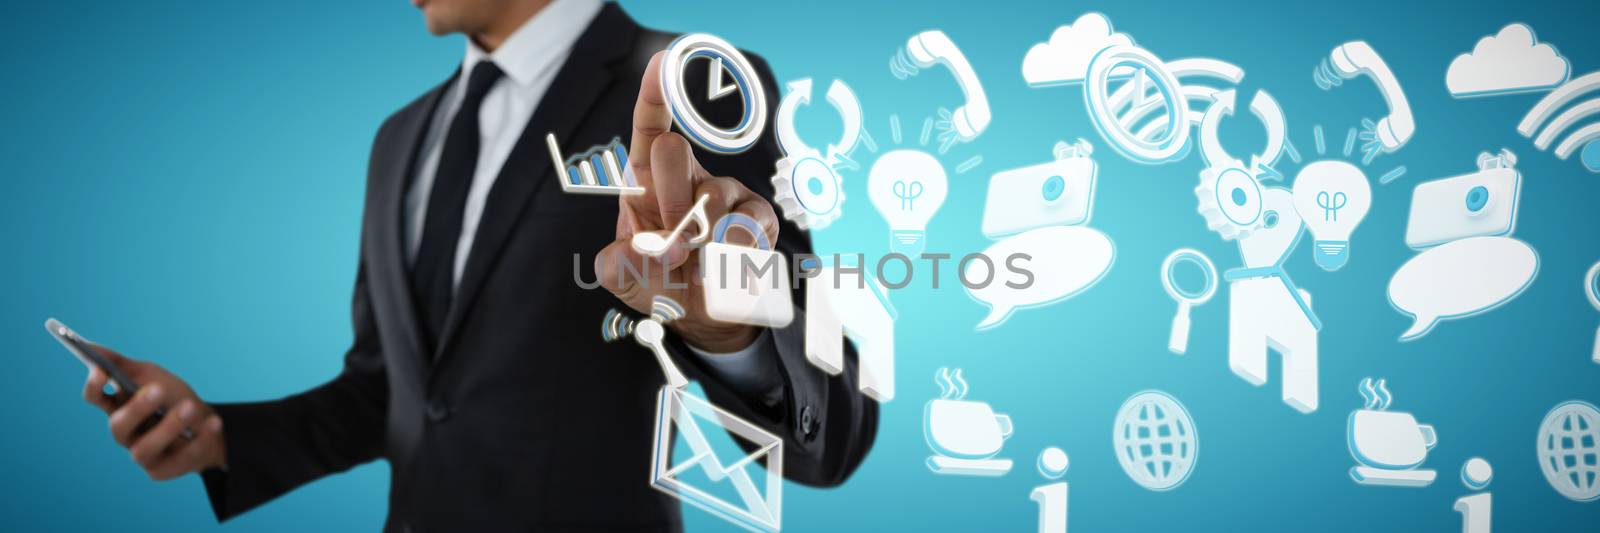 Mid section of businessman using phone while touching invisible interface against abstract blue background